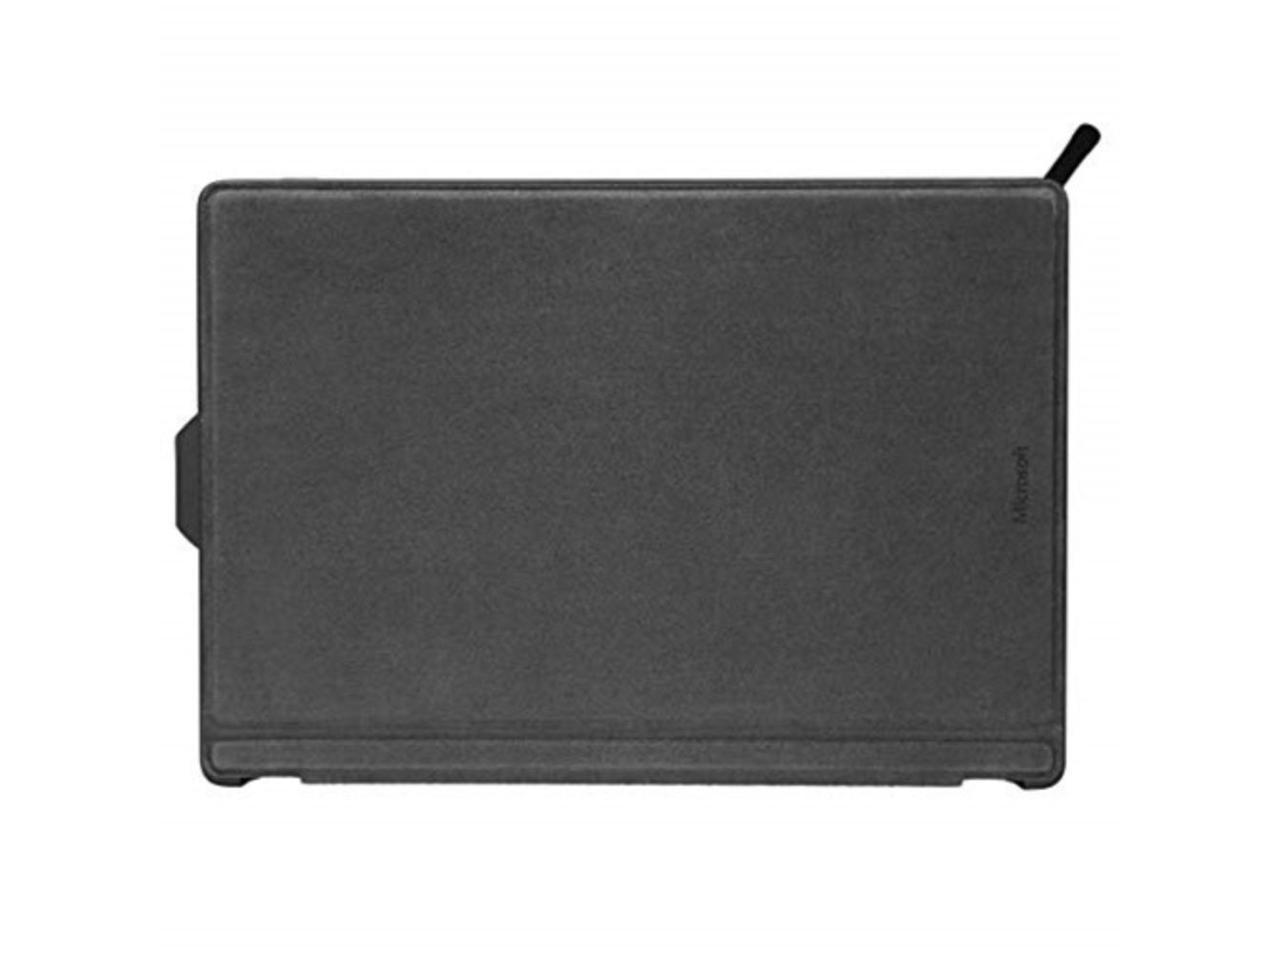 TARGUS THZ804GL PROTECT CASE FOR MICROSOFT SURFACE PRO 7, 6, 5, 5 LTE, AND 4 BLACK 12.3